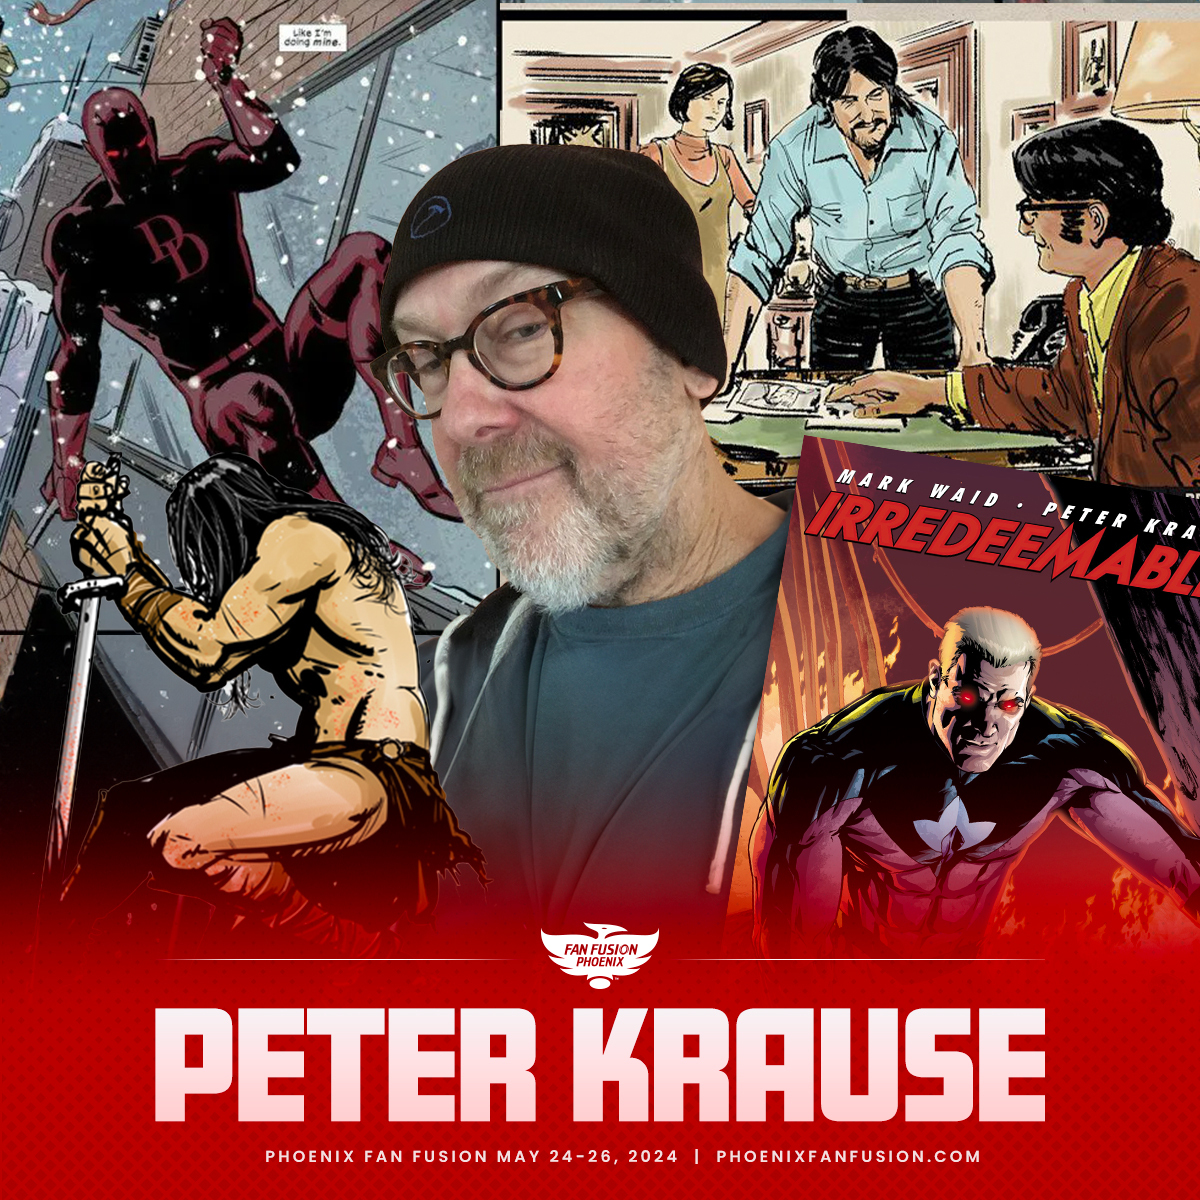 THIS weekend! Scott @Koblish and @petergkrause are BOTH Hero's special guests @PhxFanFusion, May 24-25-26! Swing by on us at booth #1658! Tix and info: phoenixfanfusion.com